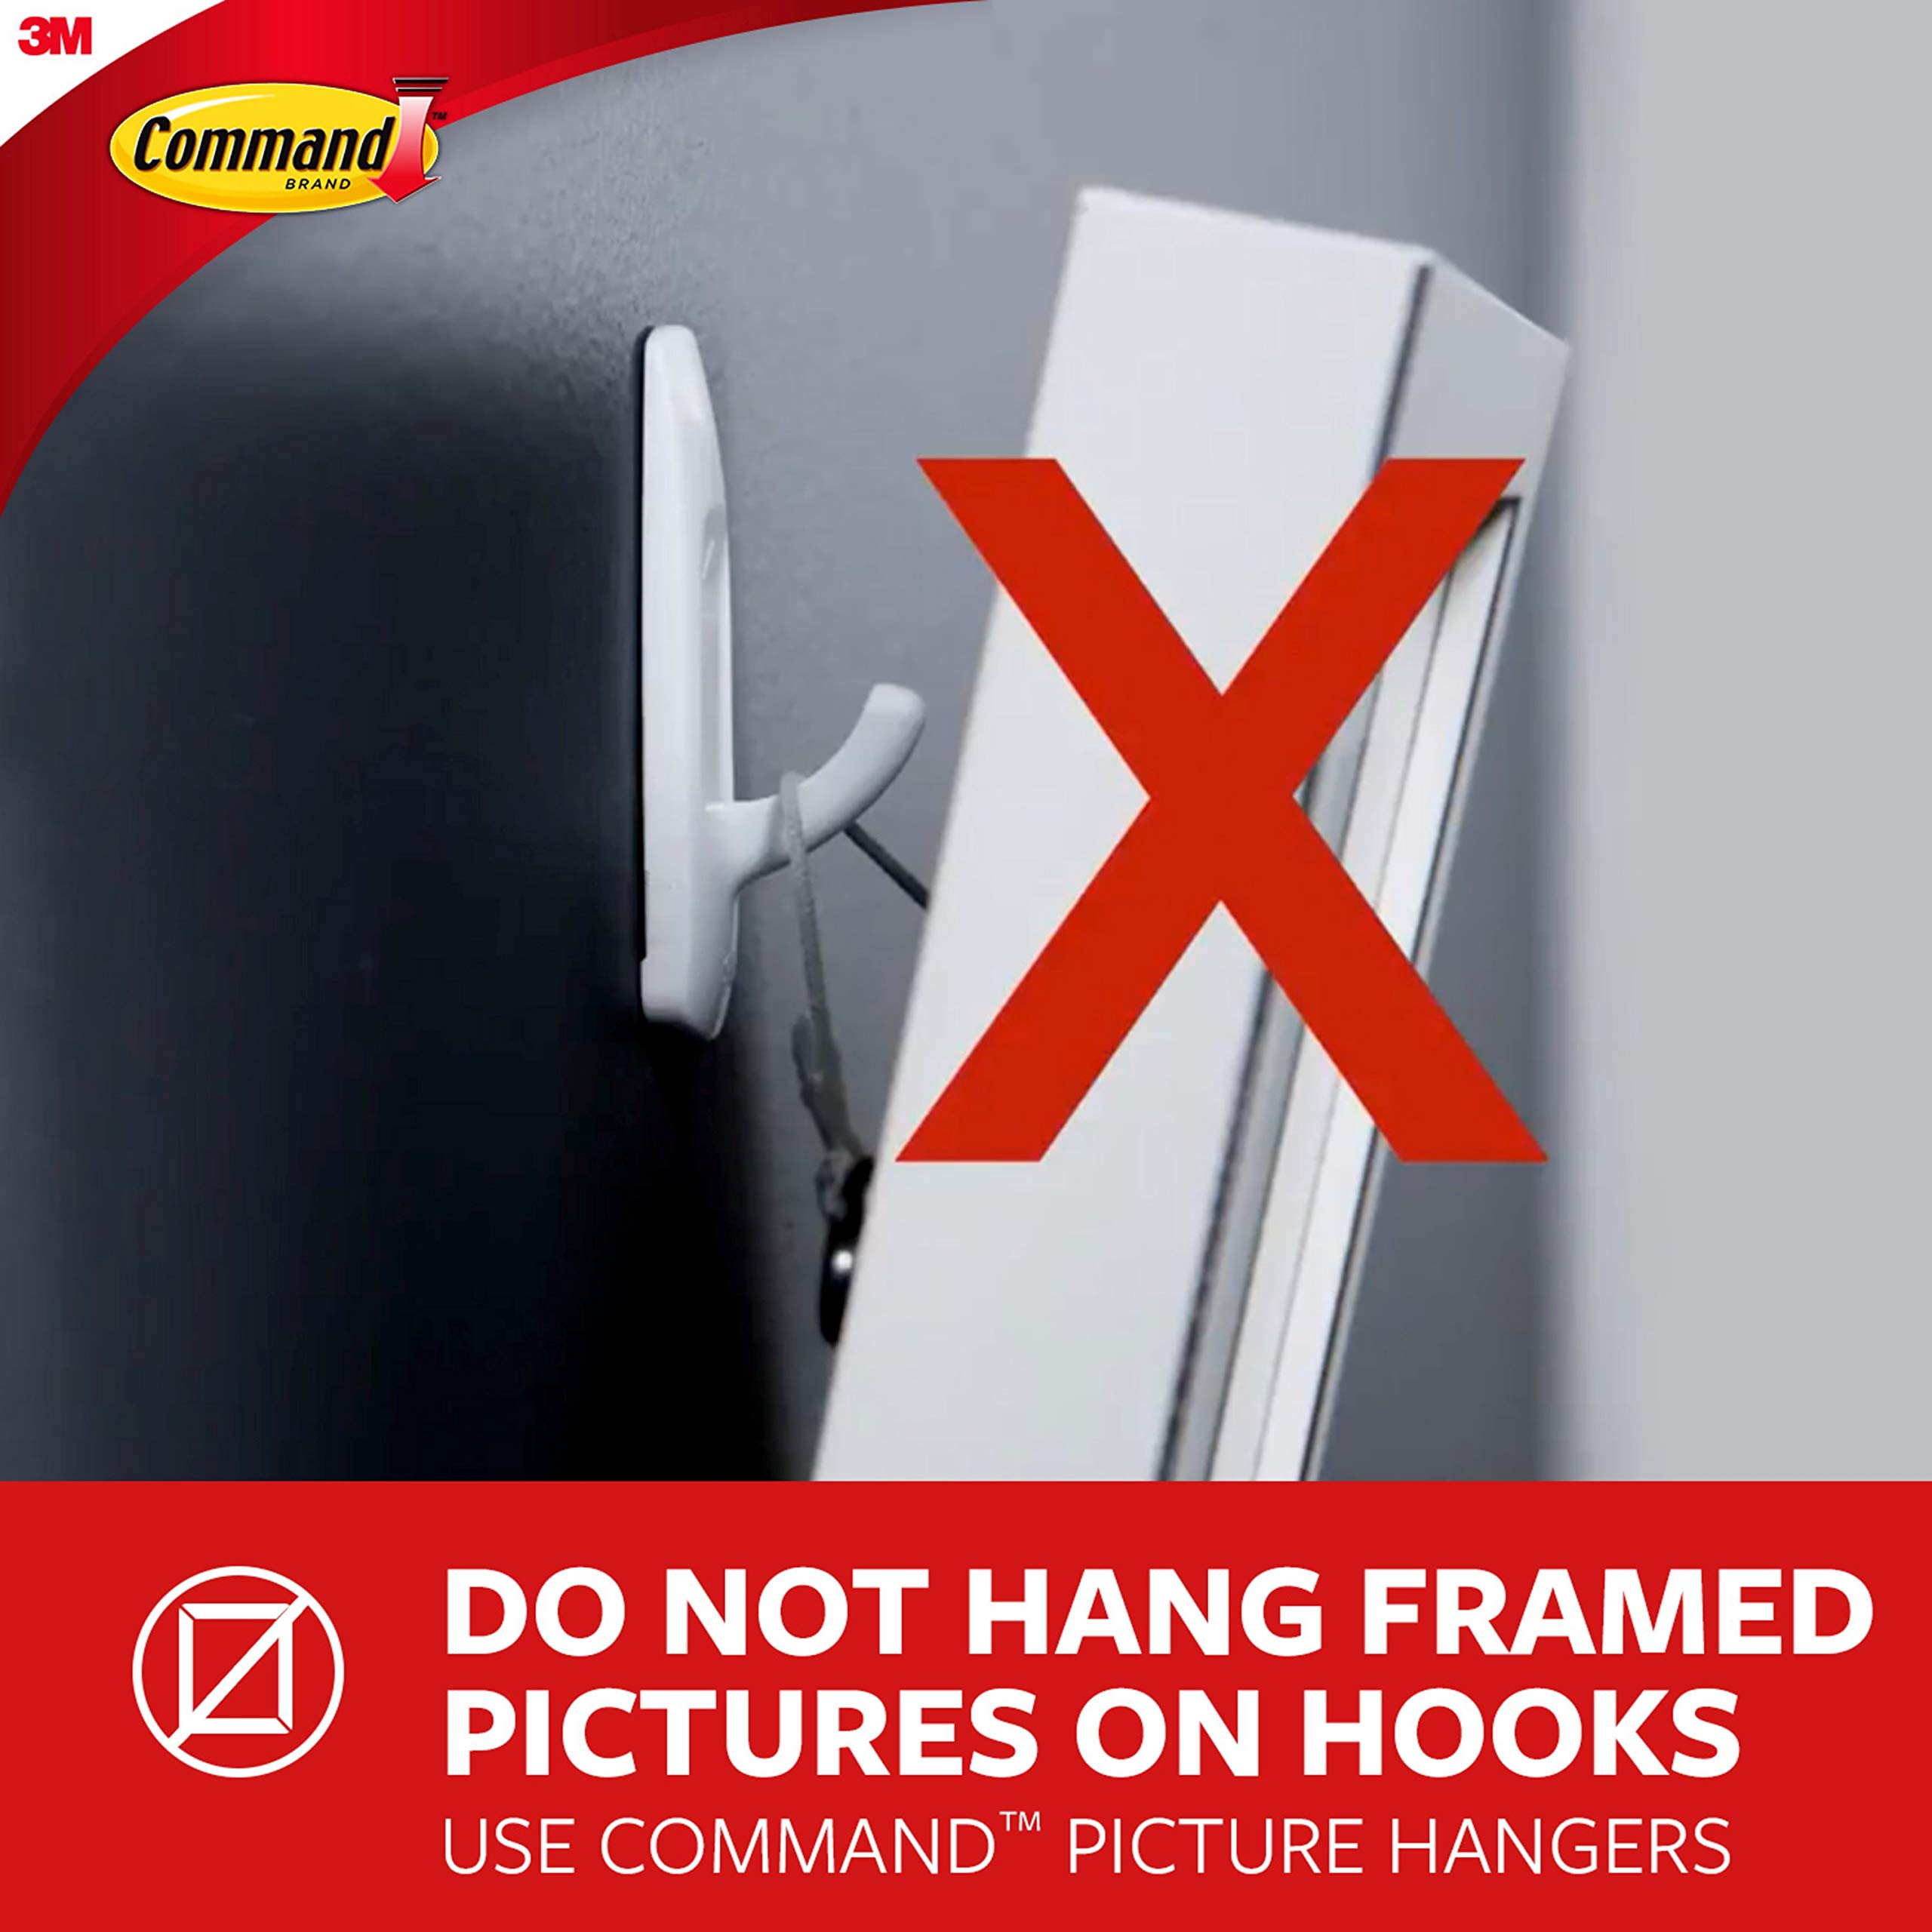 Command Small Wire Toggle Hooks, Damage Free Hanging Wall Hooks with Adhesive Strips, Wall Hooks for Hanging Back to School Dorm Organizers, 10 Clear Hooks and 12 Command Strips